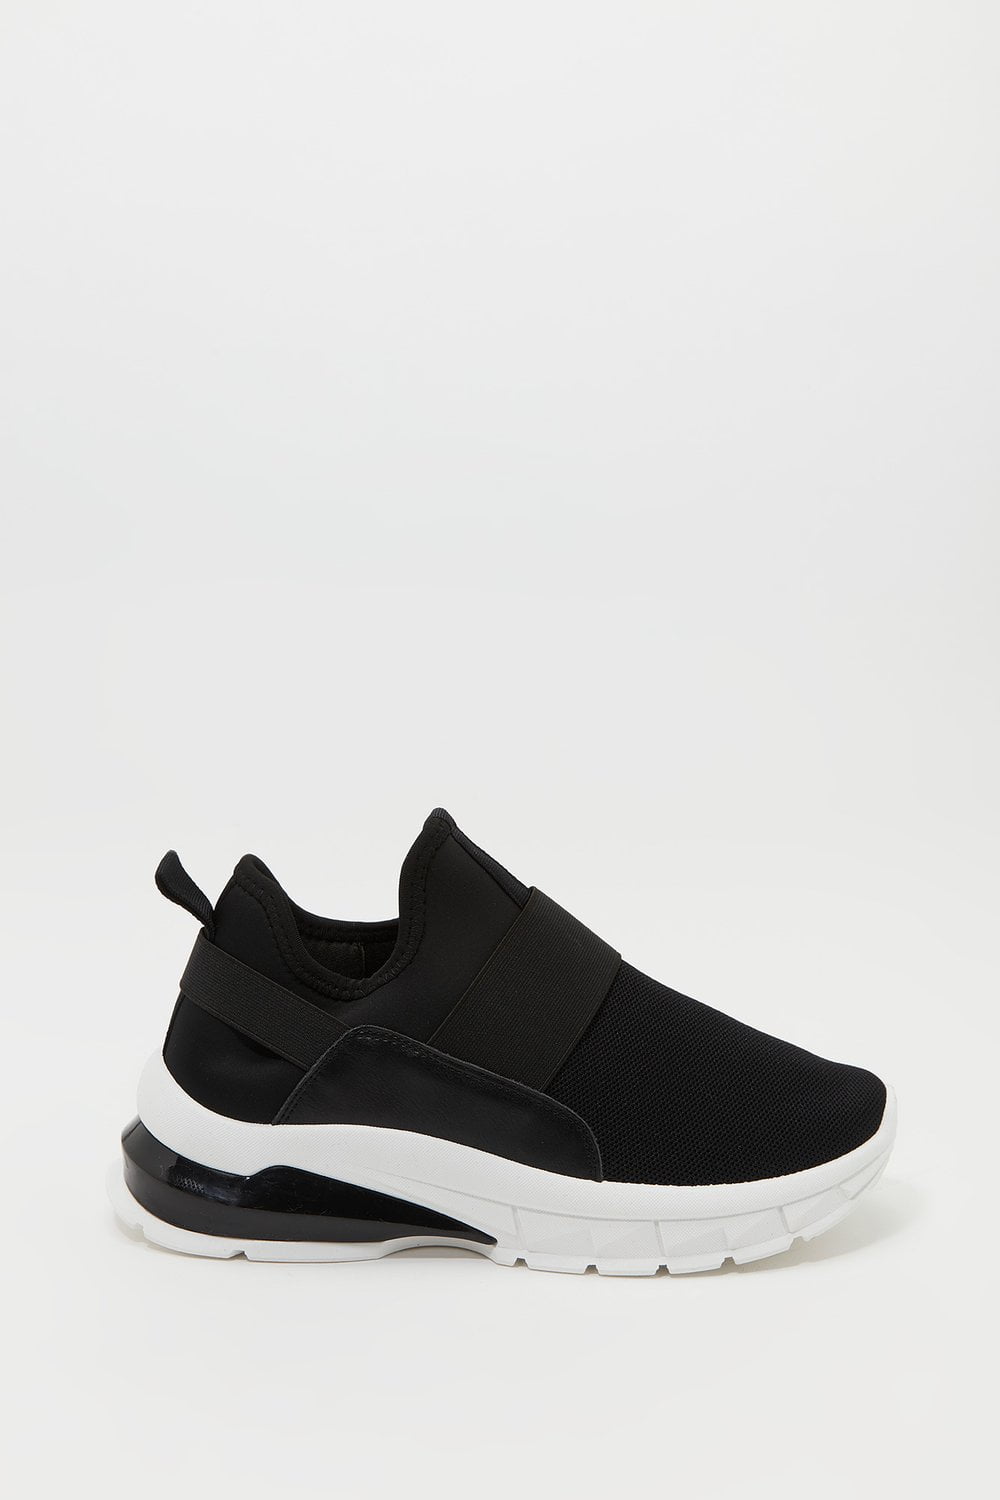 laceless sneakers black